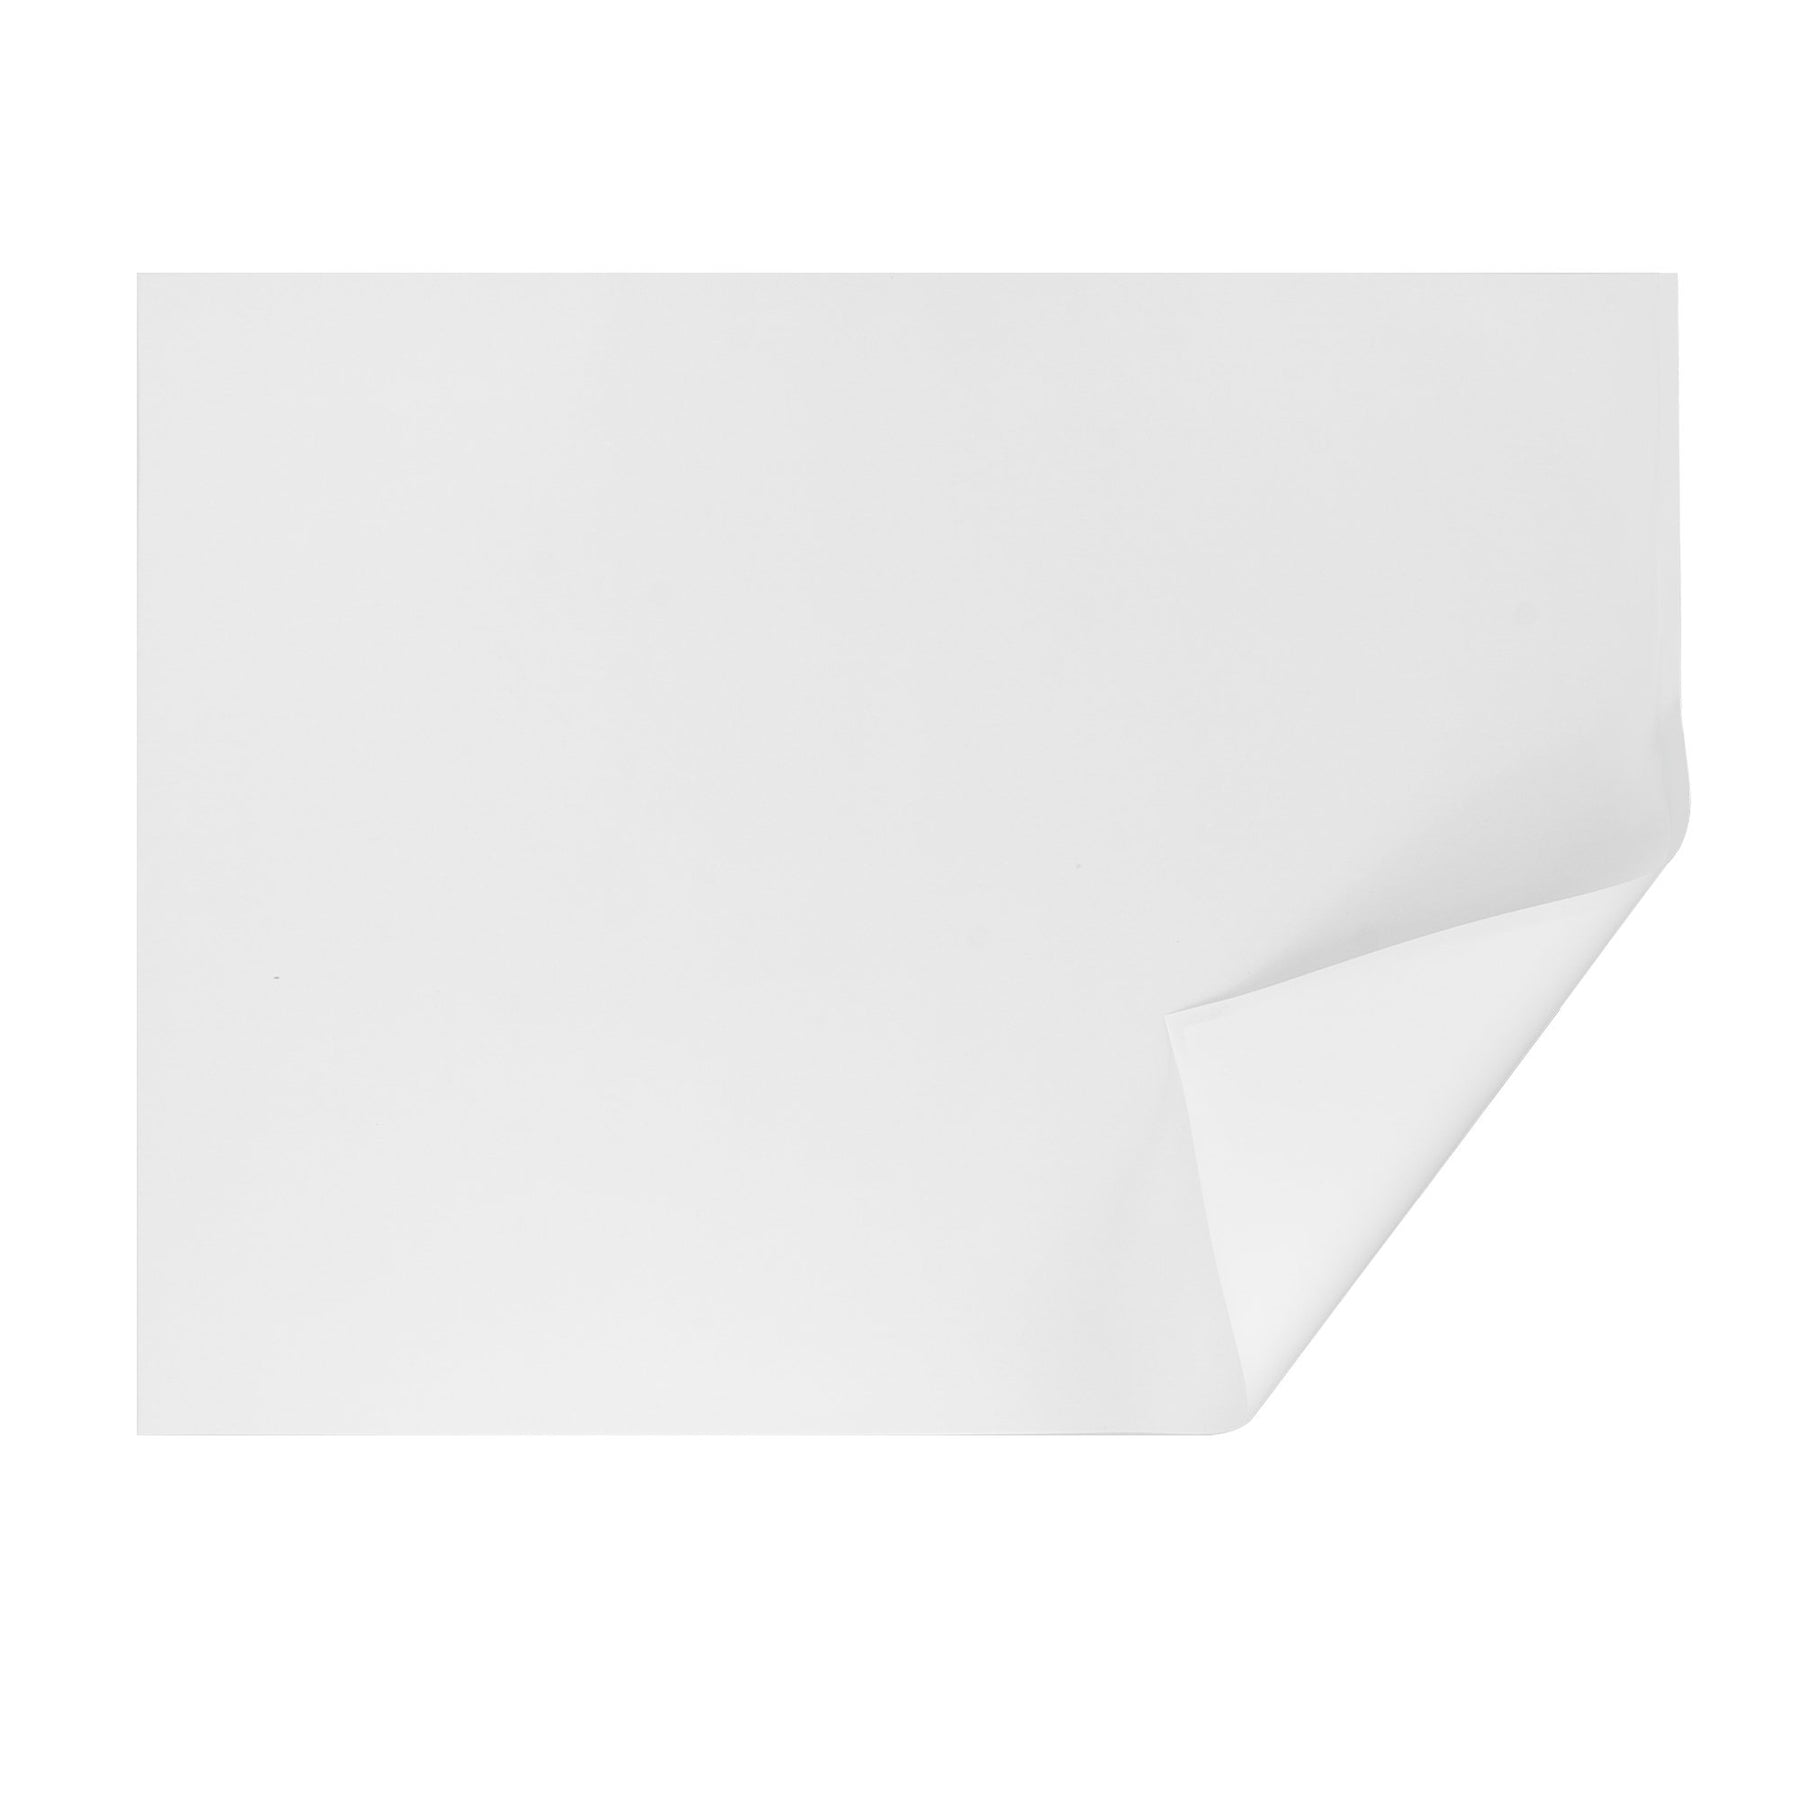 Pacific Arc, Paper Rag Vellum Sheets, For Drafting